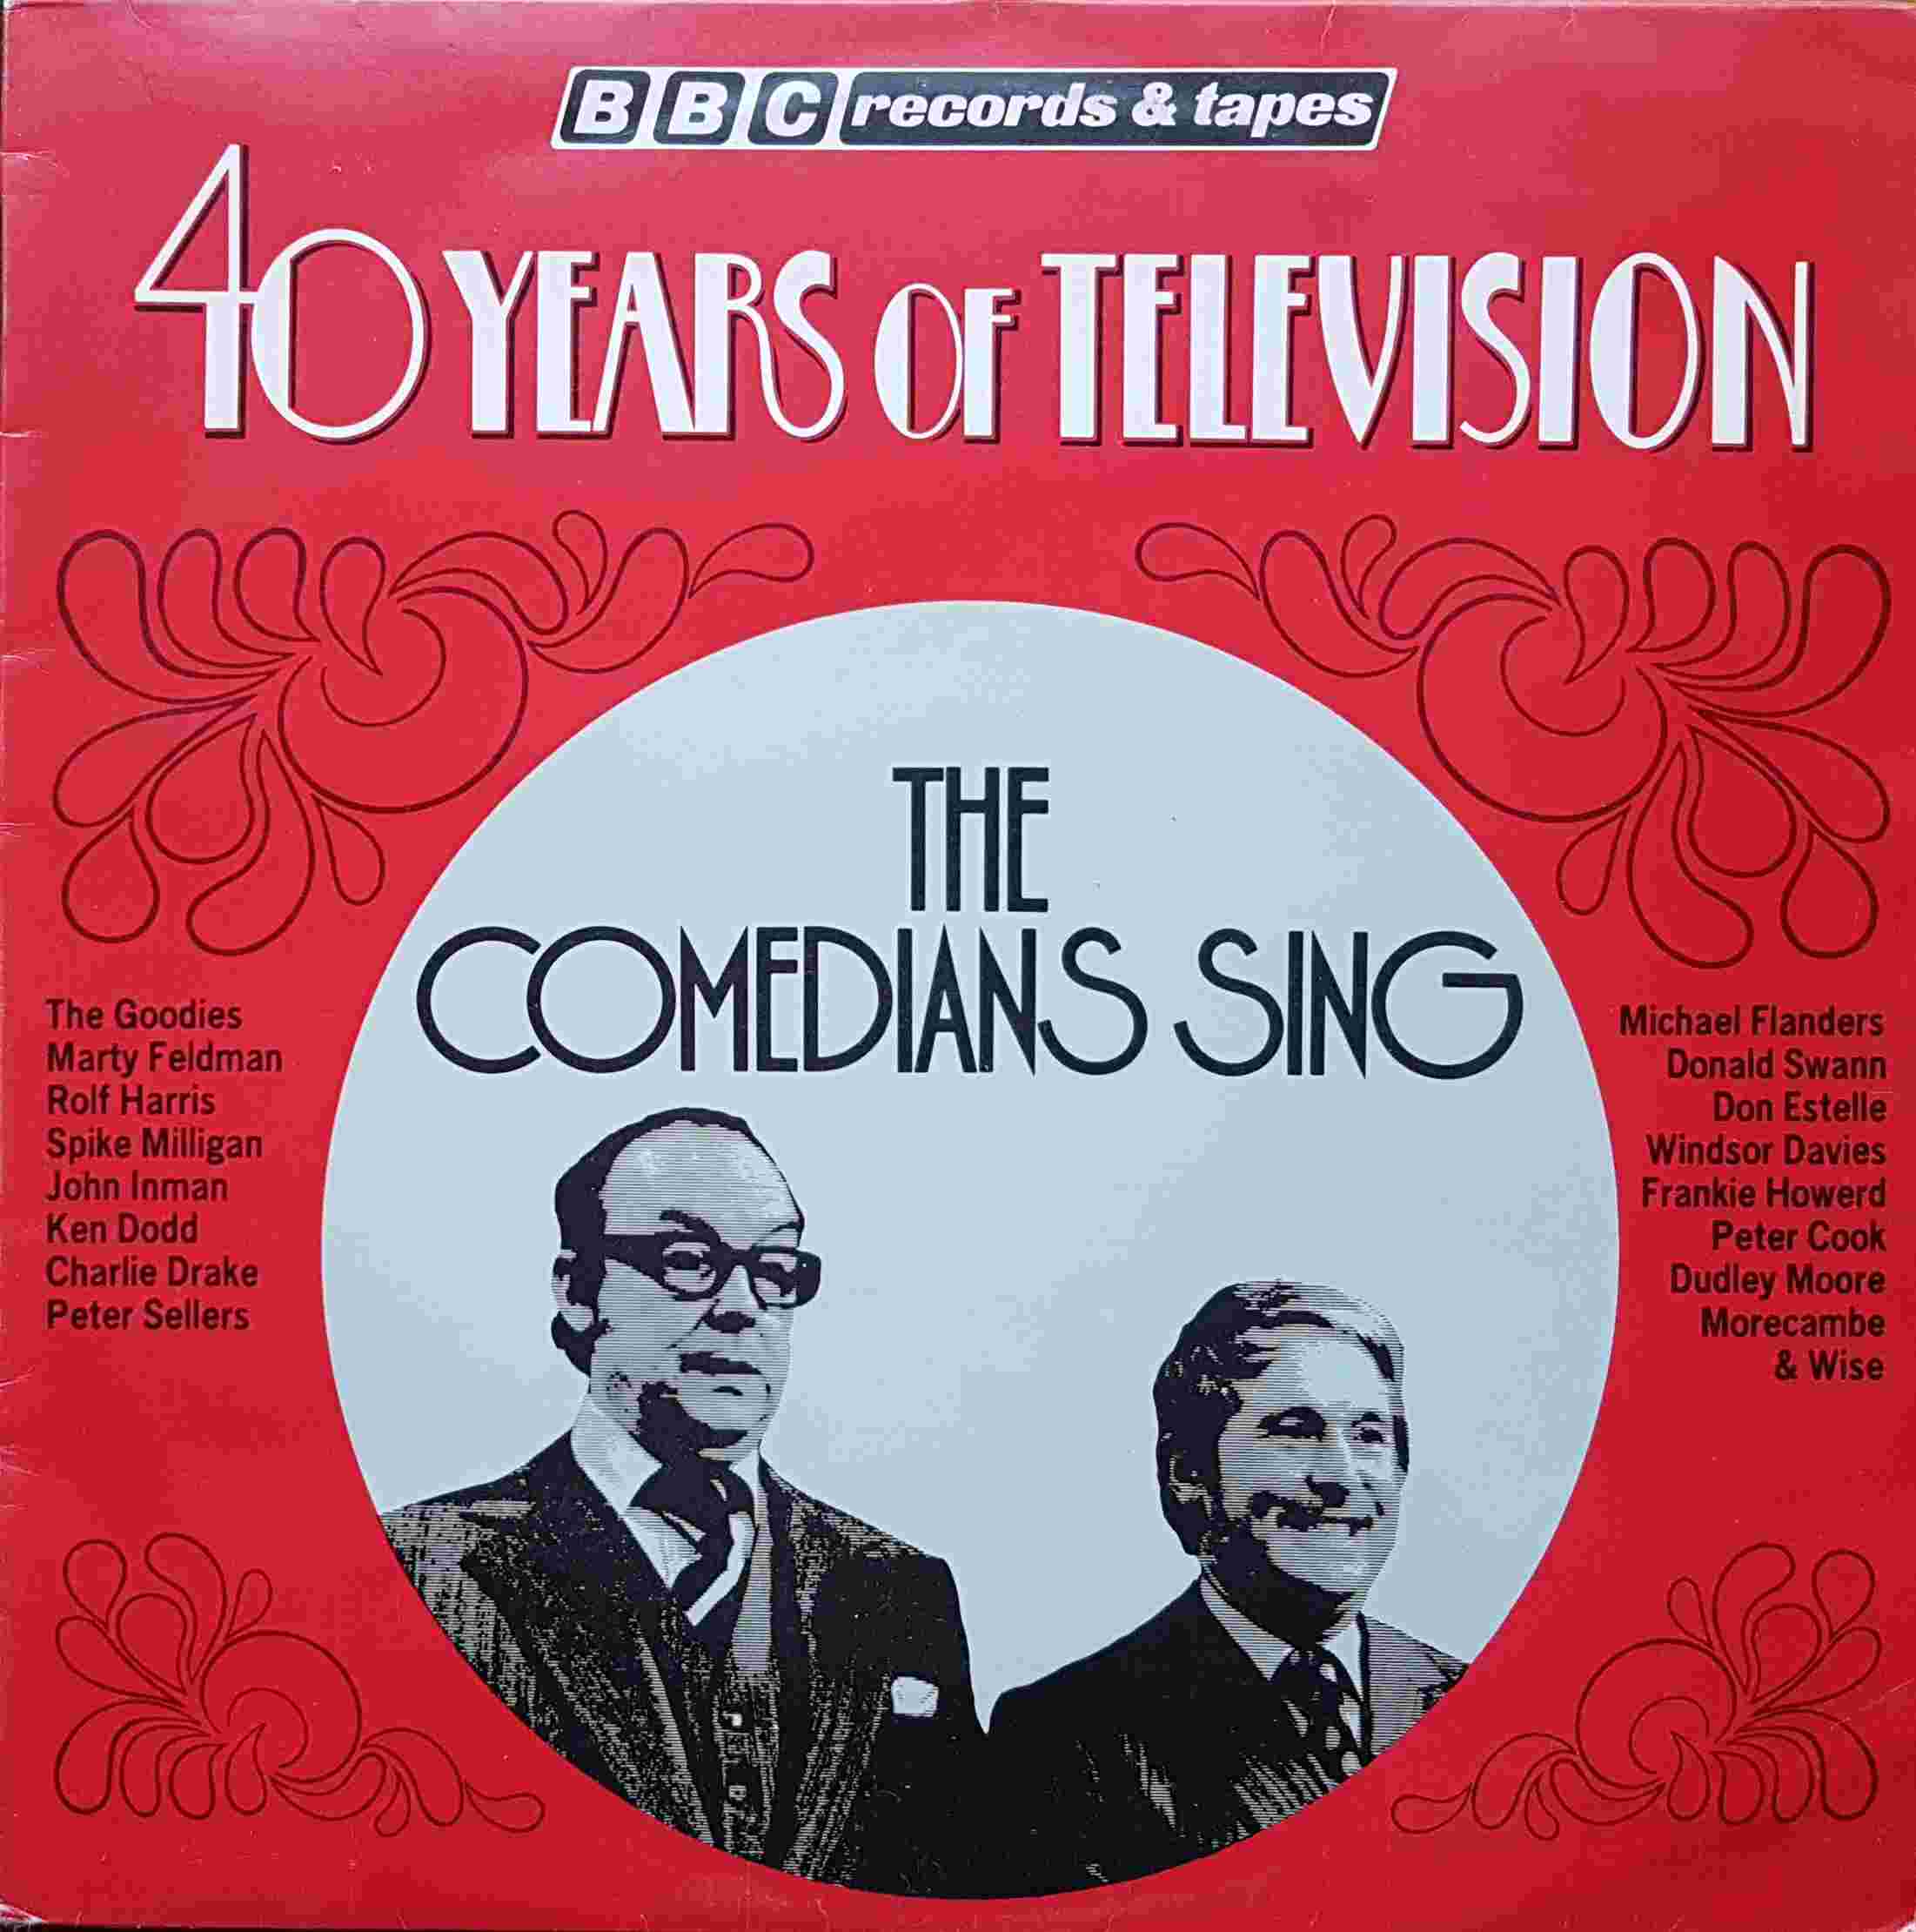 Picture of REB 251 The comedians sing by artist Various from the BBC albums - Records and Tapes library